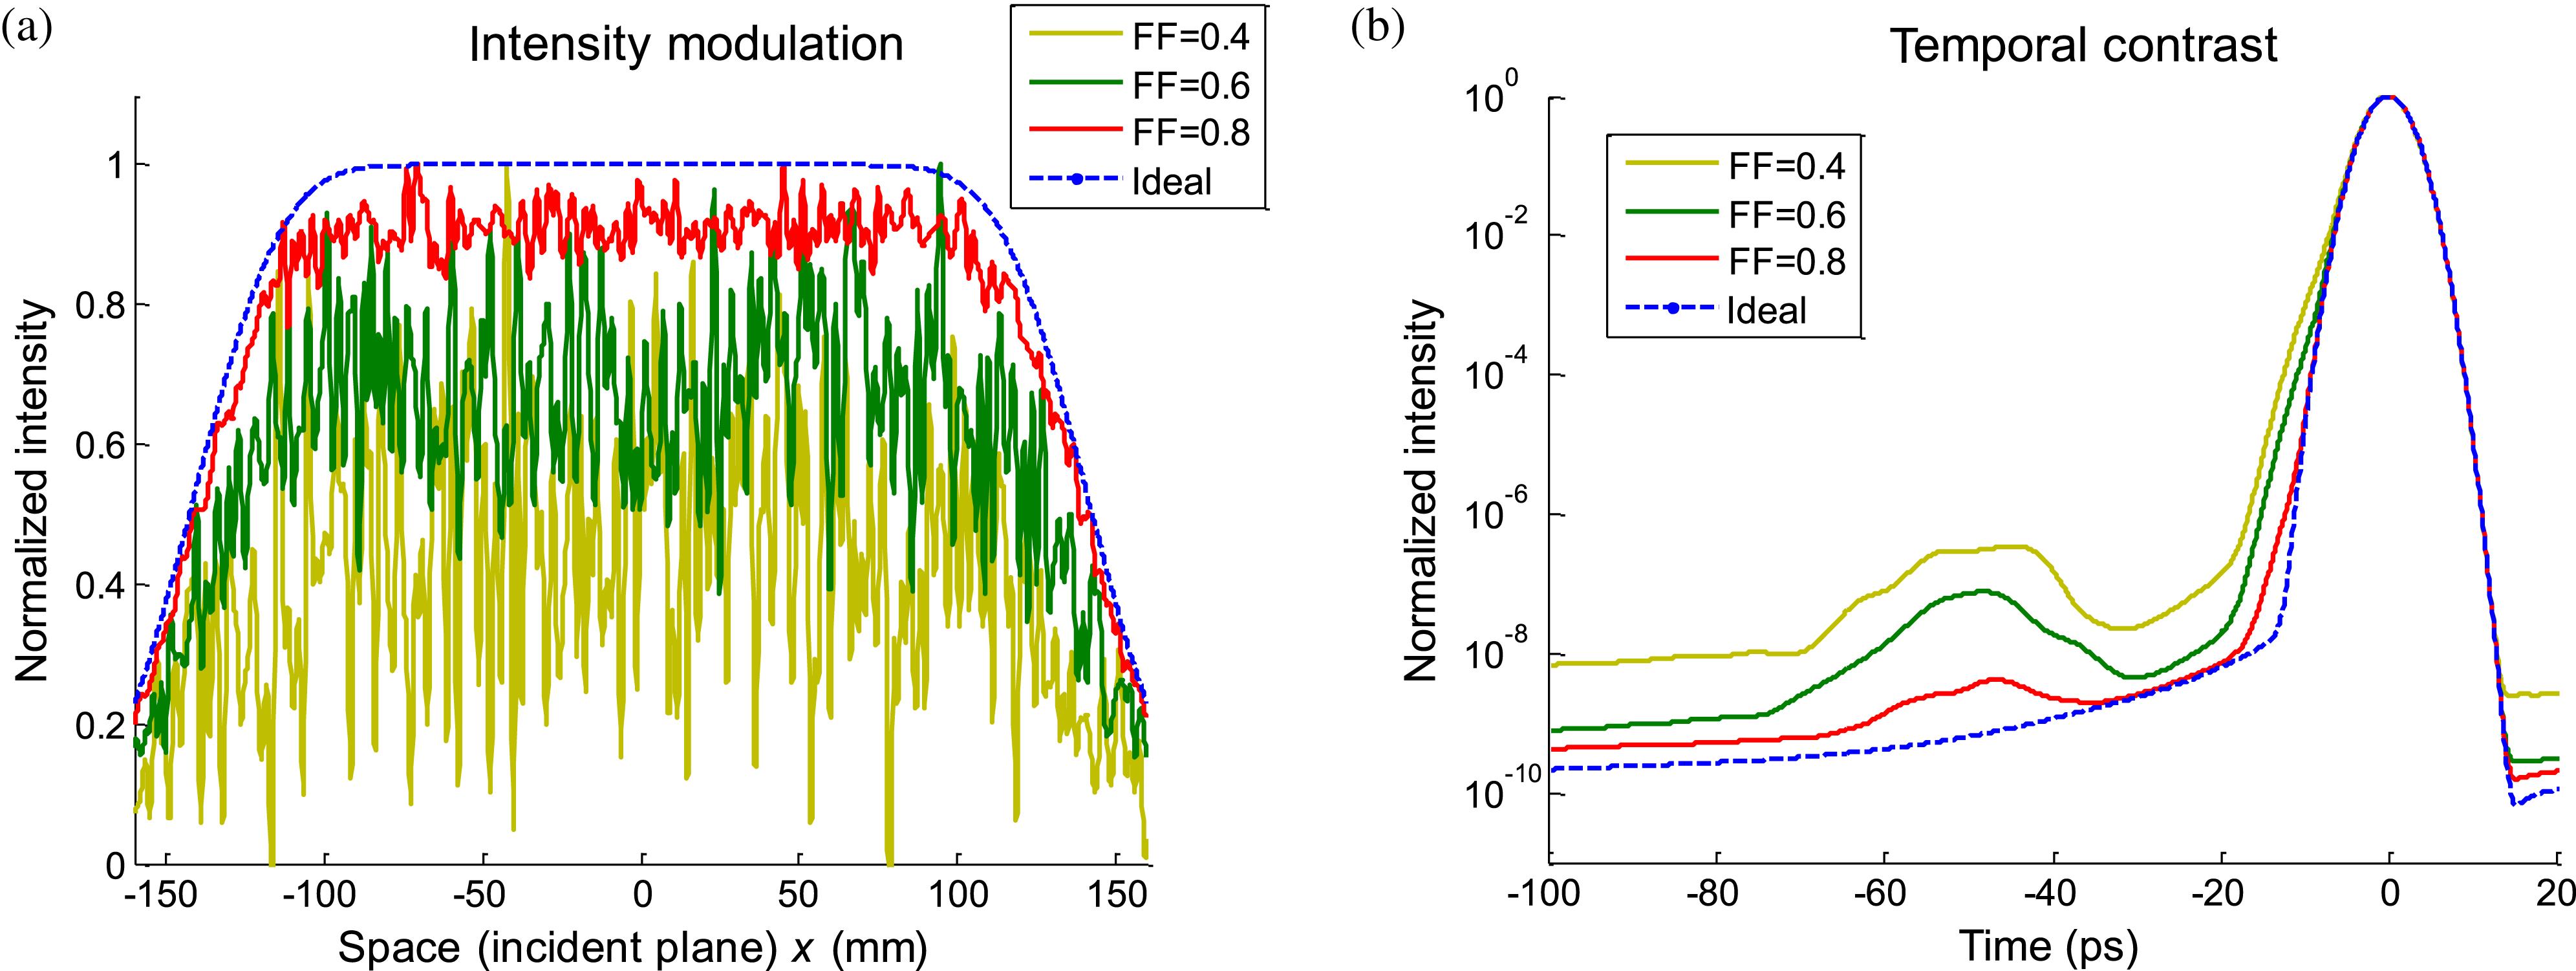 Temporal contrast degradation by intensity modulation. (a) Intensity modulation for different FFs (0.4, 0.6 and 0.8). (b) Temporal contrast for the different intensity modulations. The dashed line is the ideal situation without modulation.